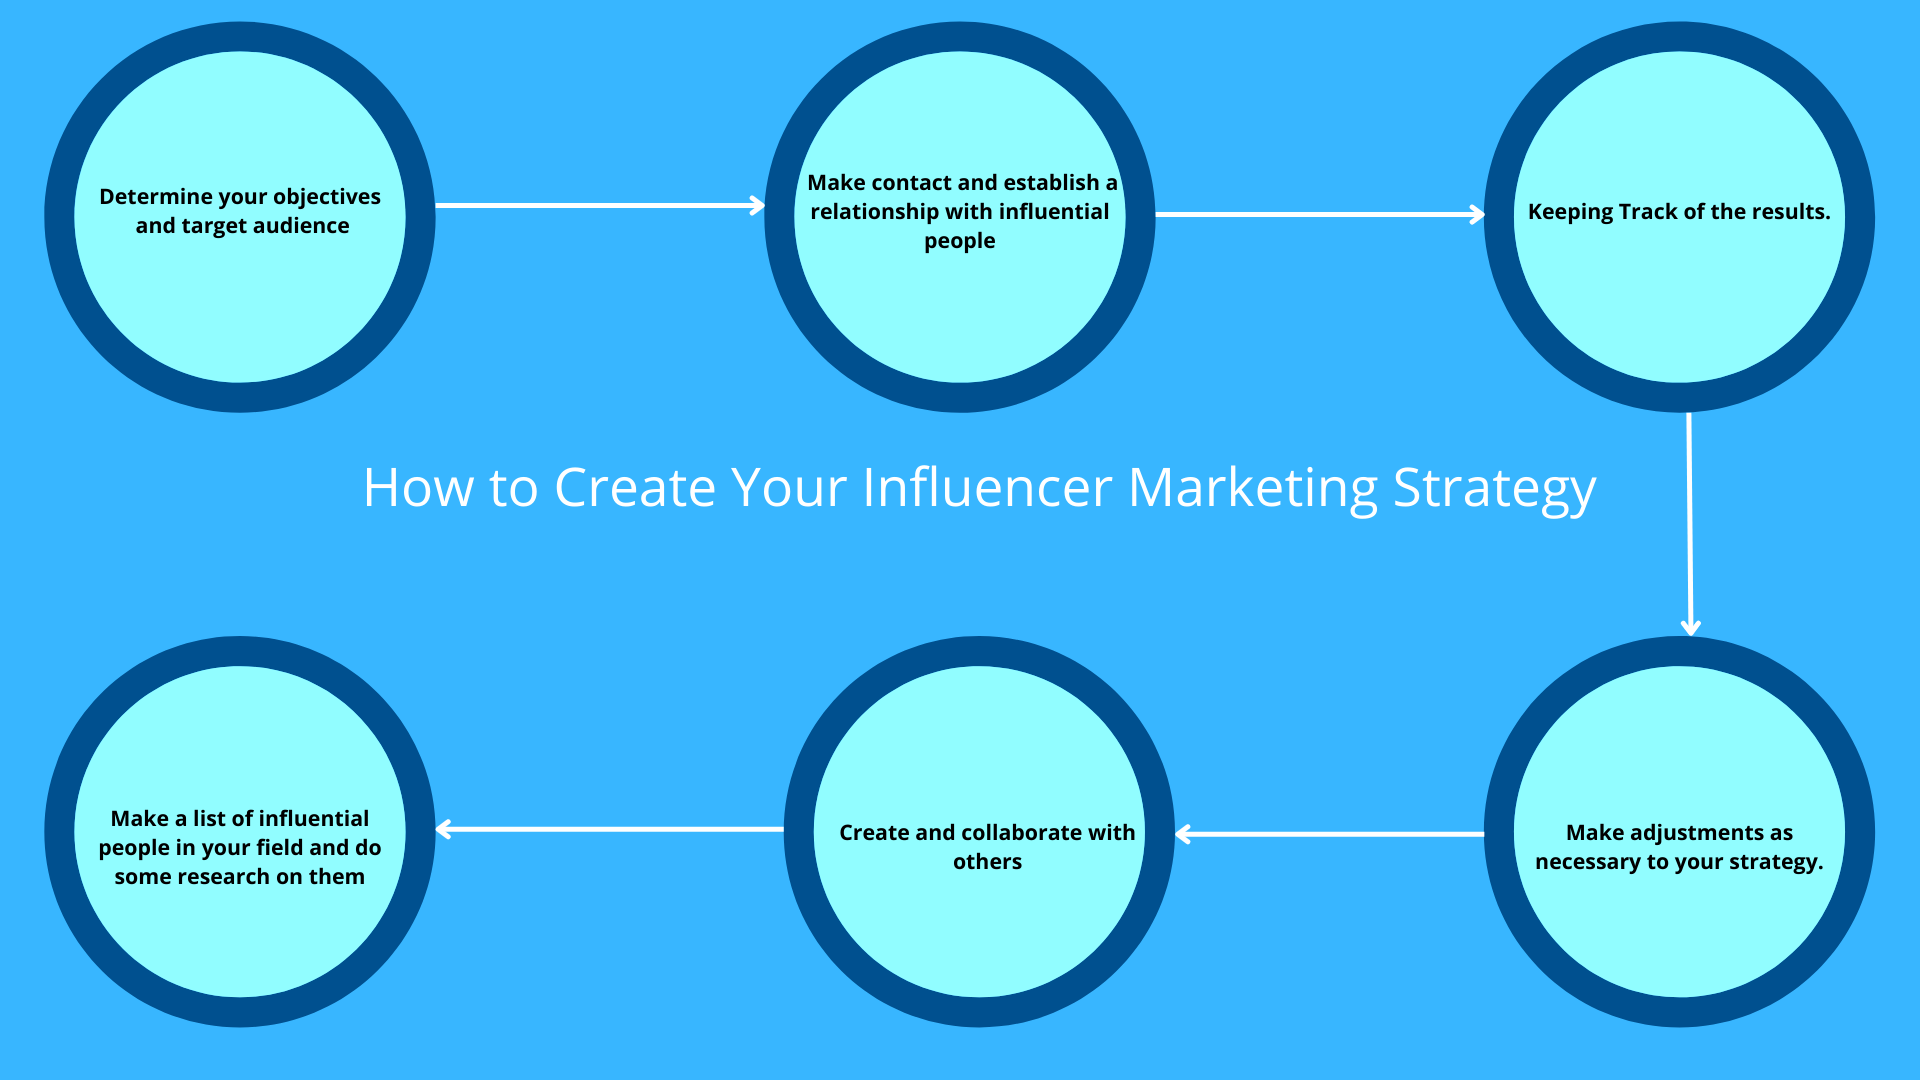 How to Use Influencers to Your Advantage: A Practical Guide